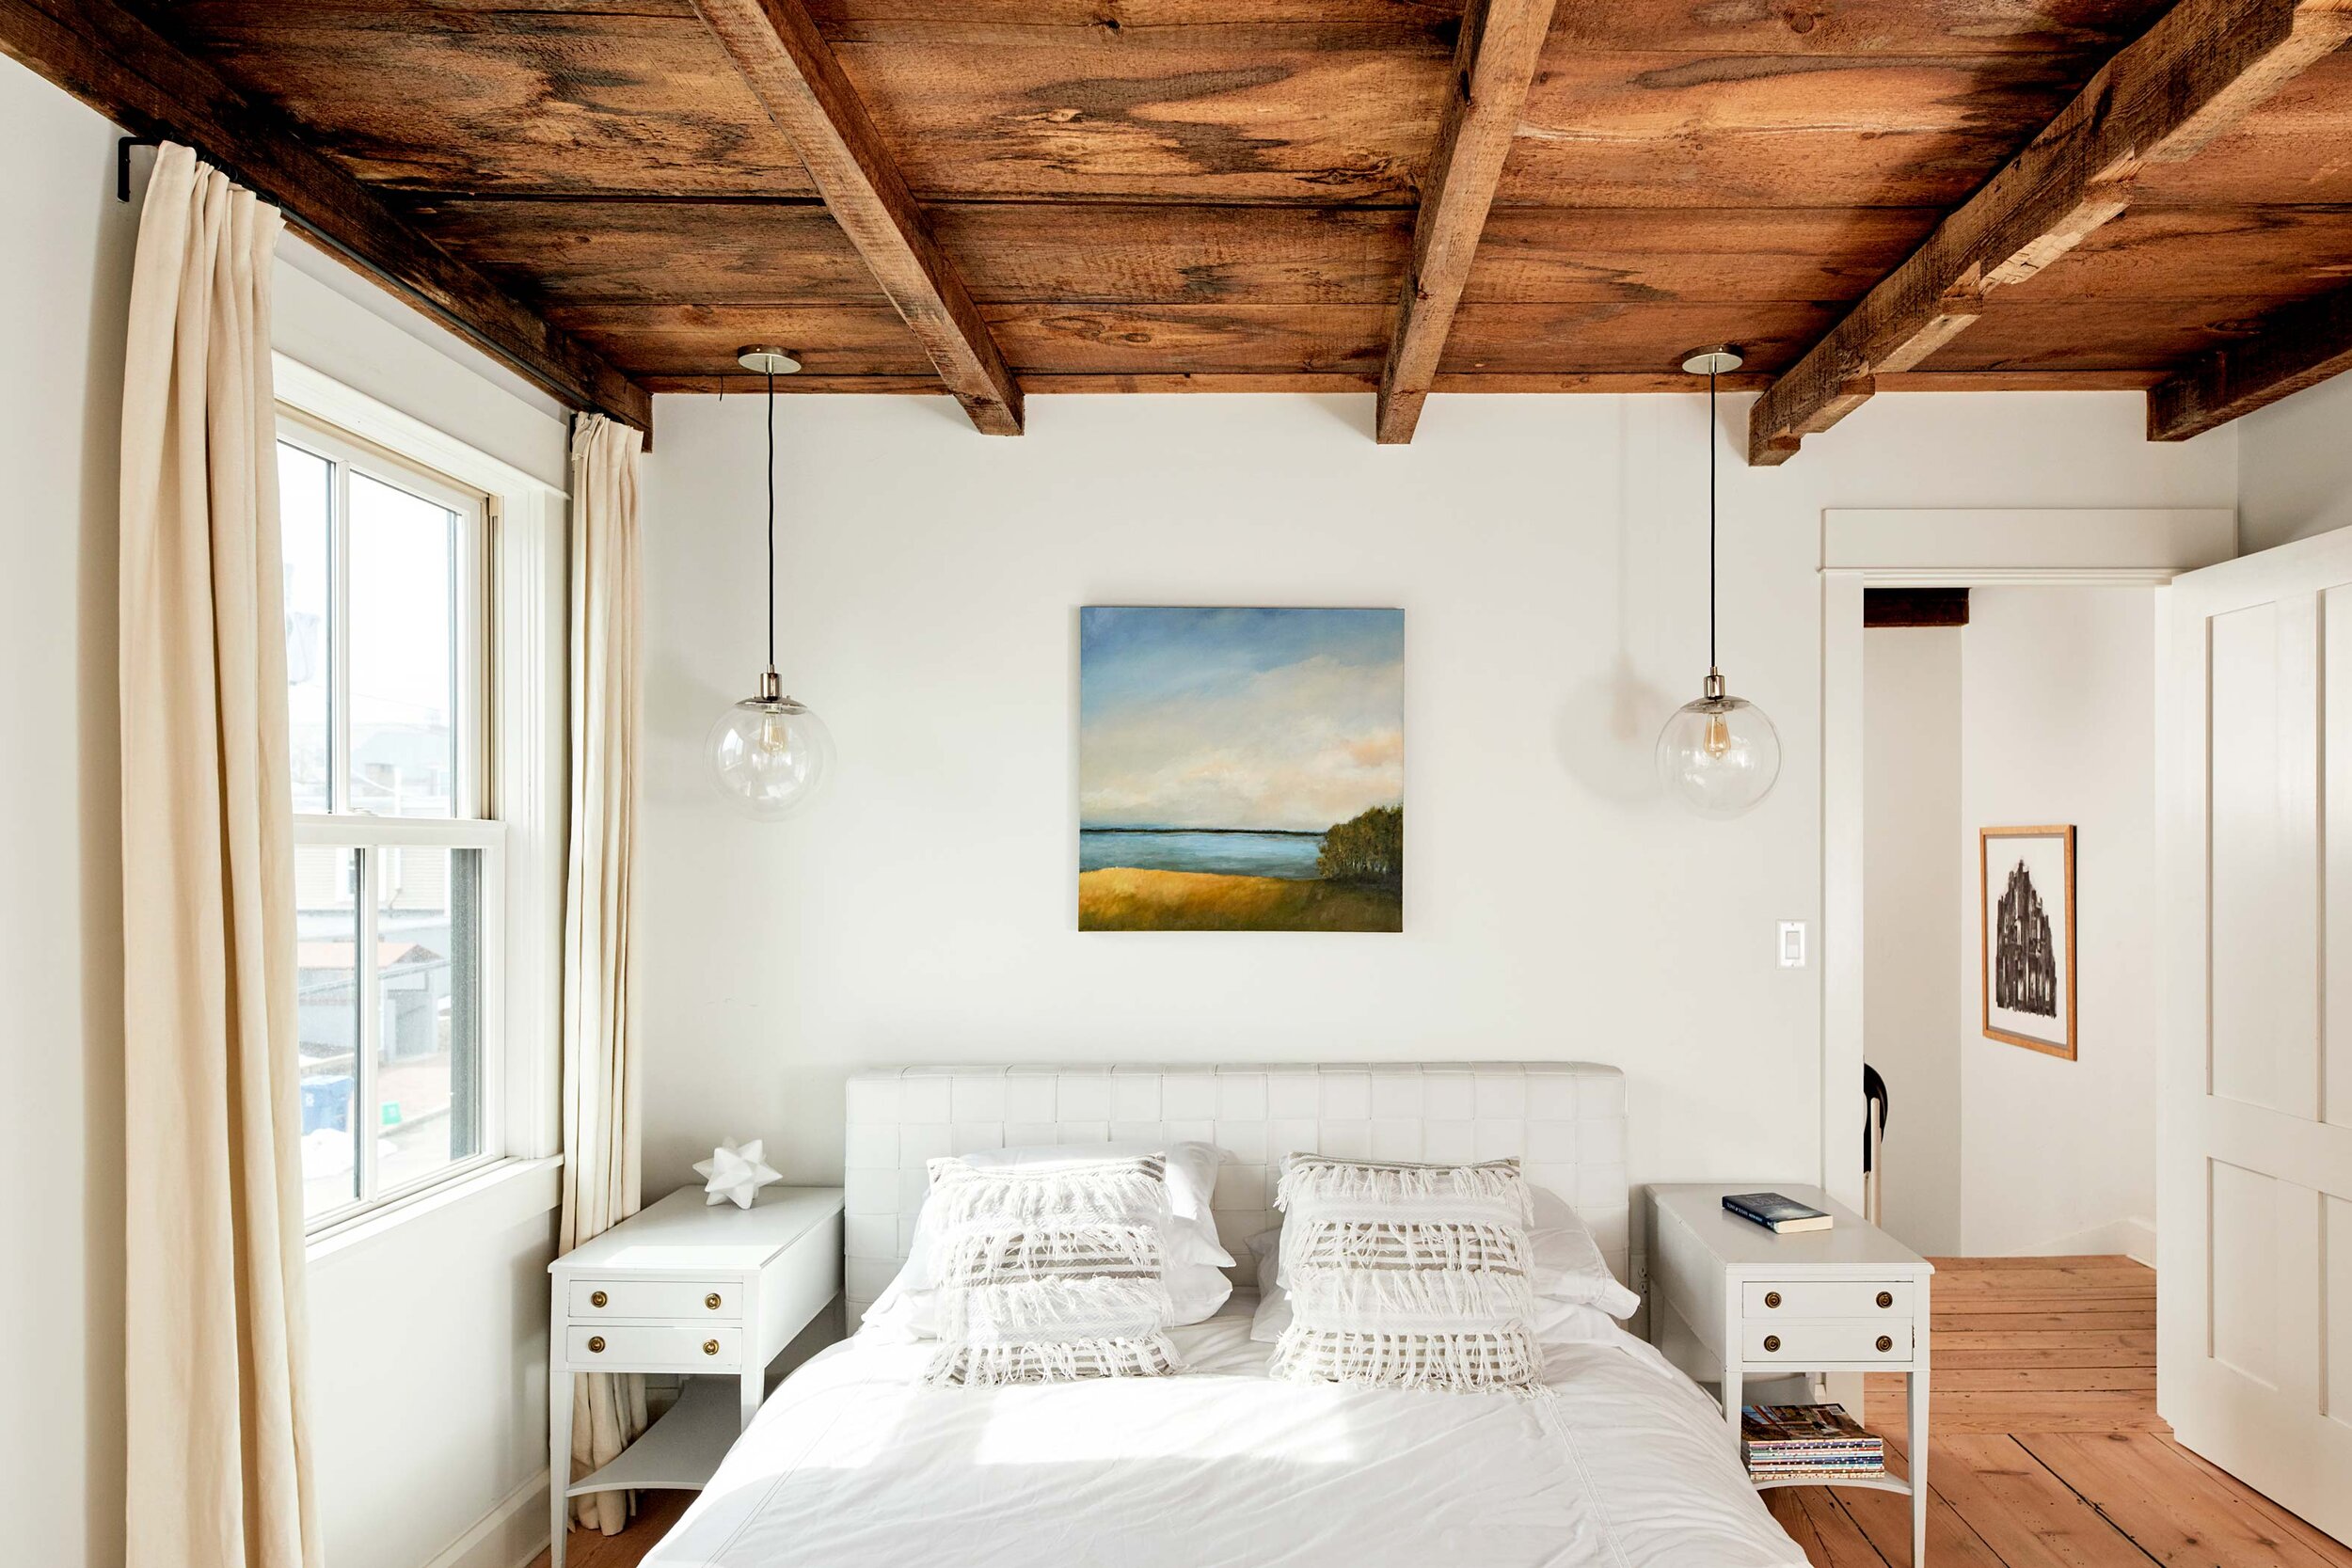  “The palette was always black, white, gray, and brown. Then I started bringing in color,” says Susan. Above the bed is a painting of Union River Bay by Lisa Creed. 